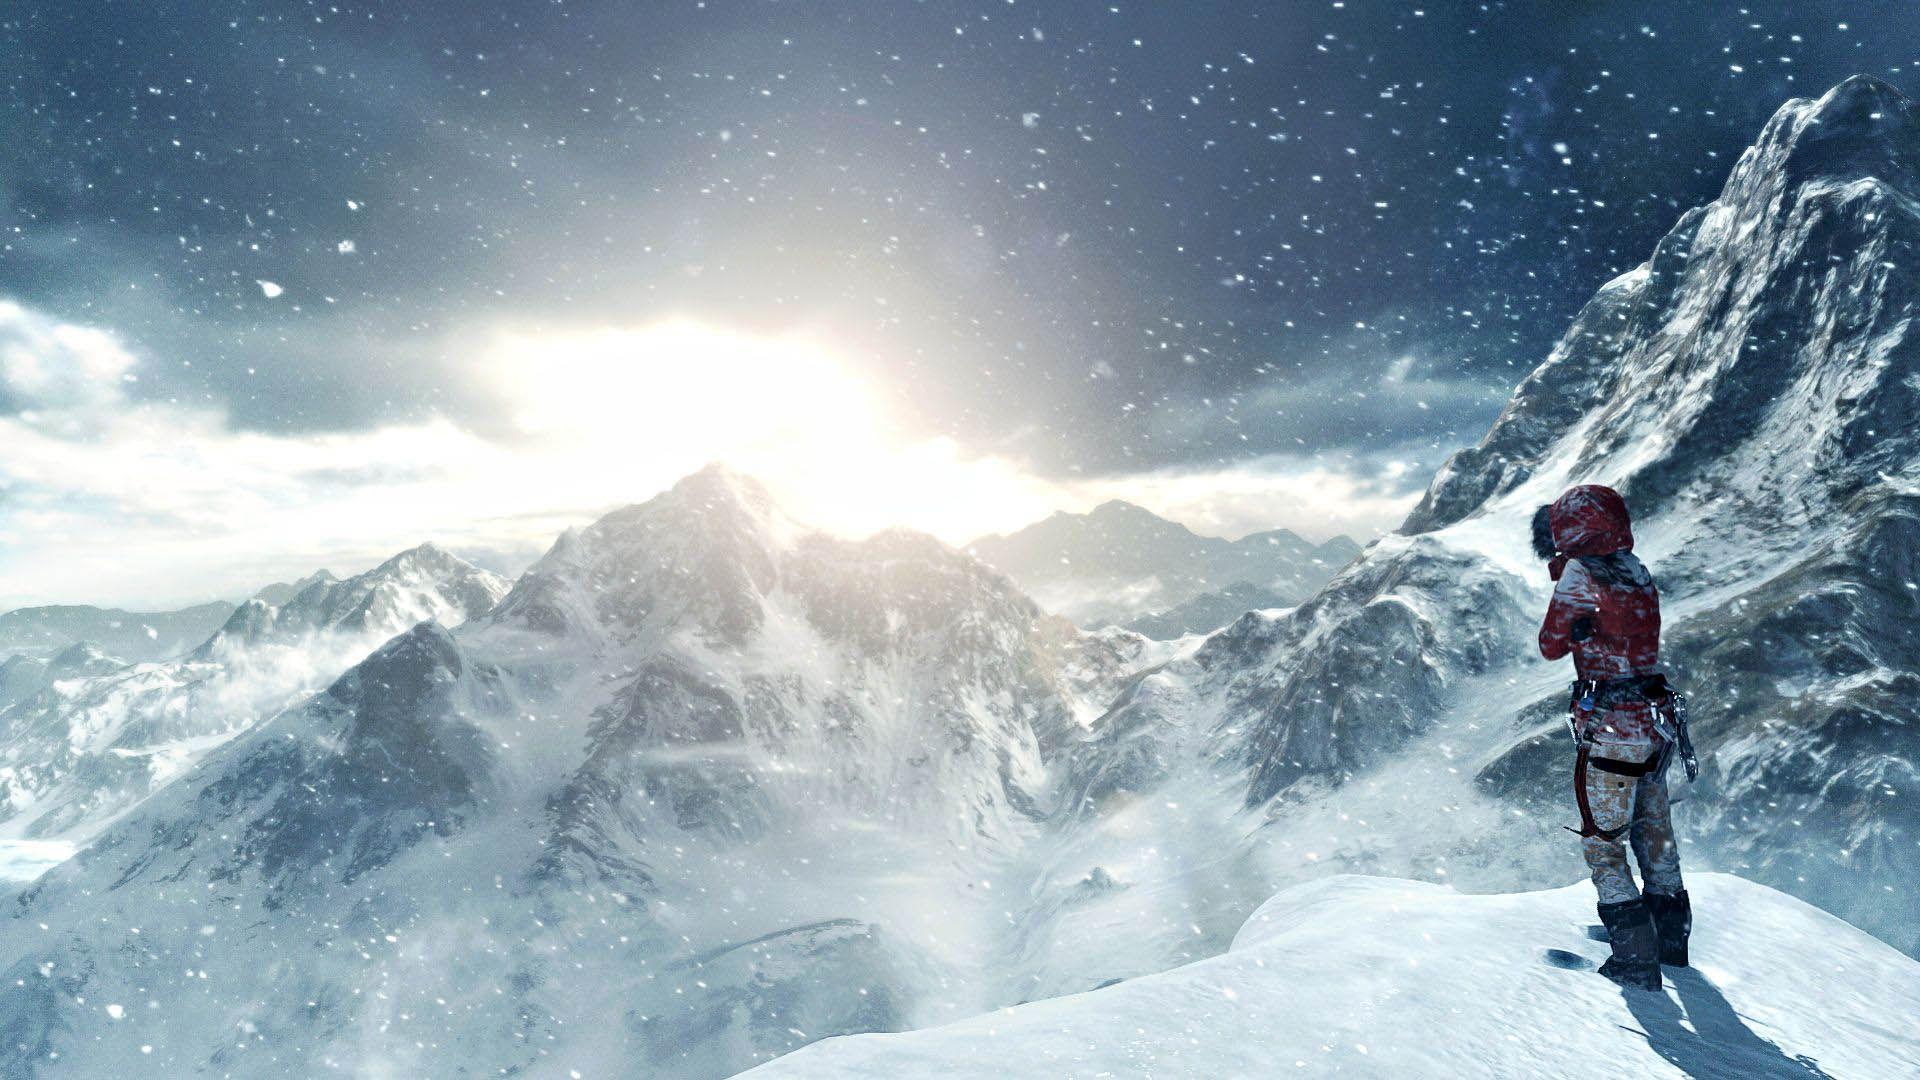 Lara in the Snowy Mountain of the Tomb Raider